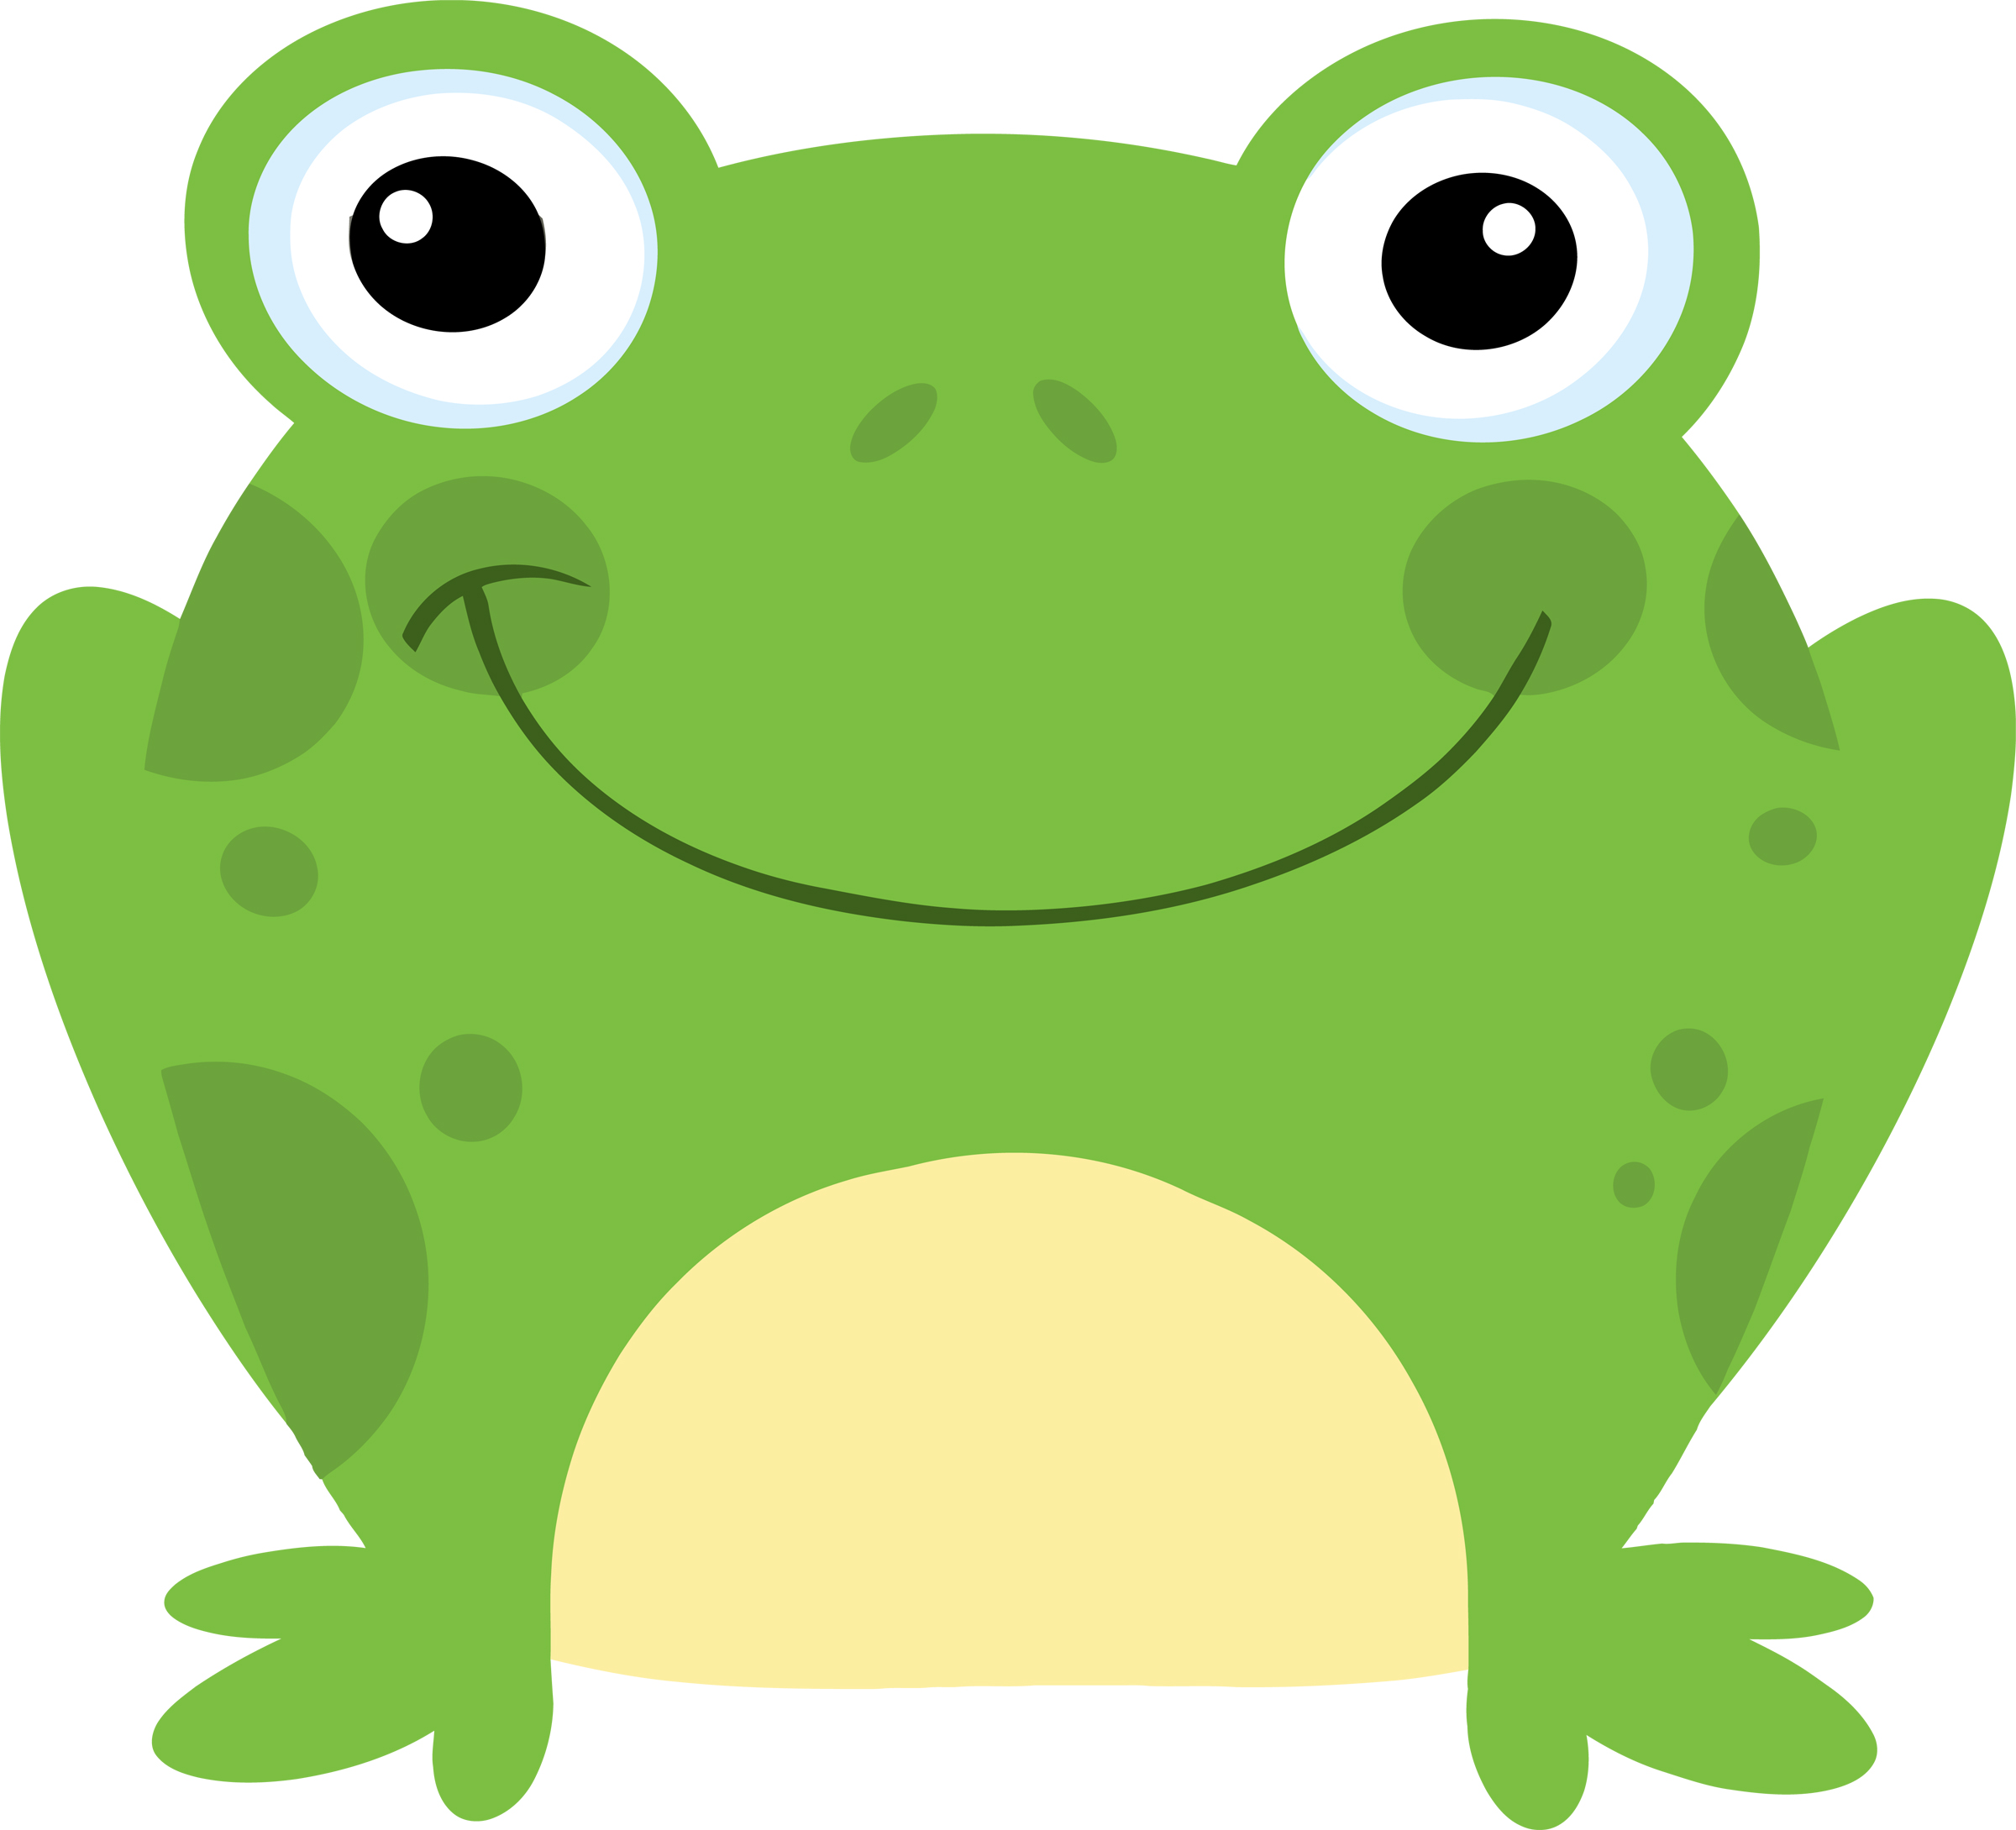 Free Frog Clip Art Pictures